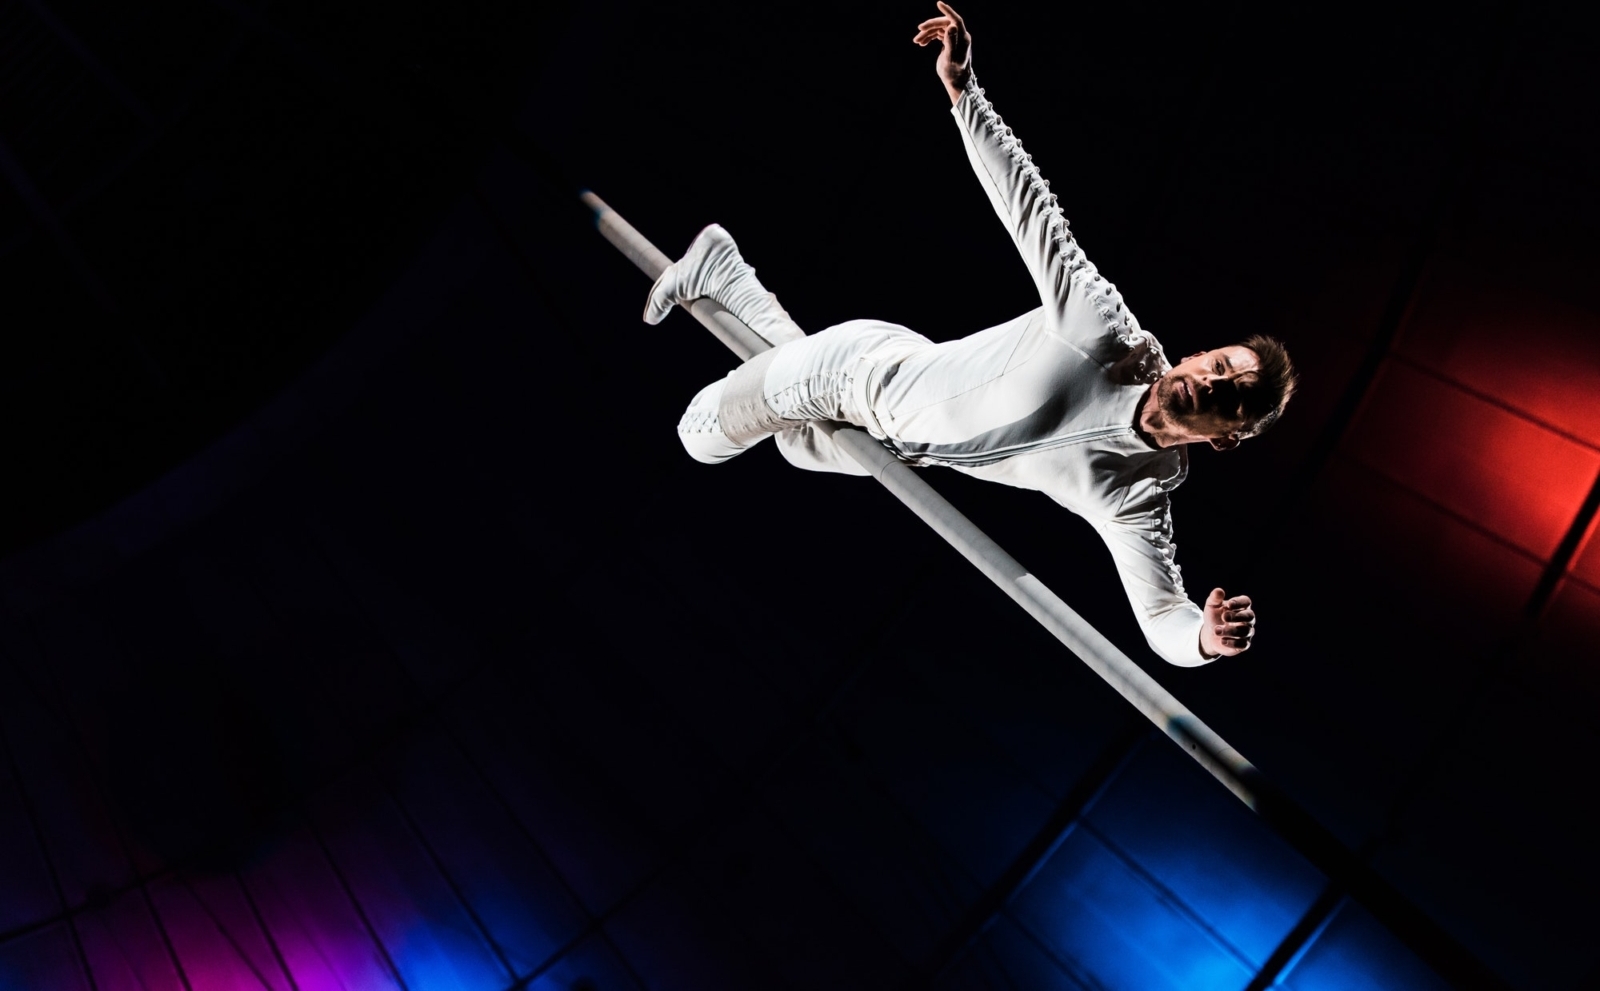 low angle view of handsome acrobat holding metallic pole with legs while performing in circus